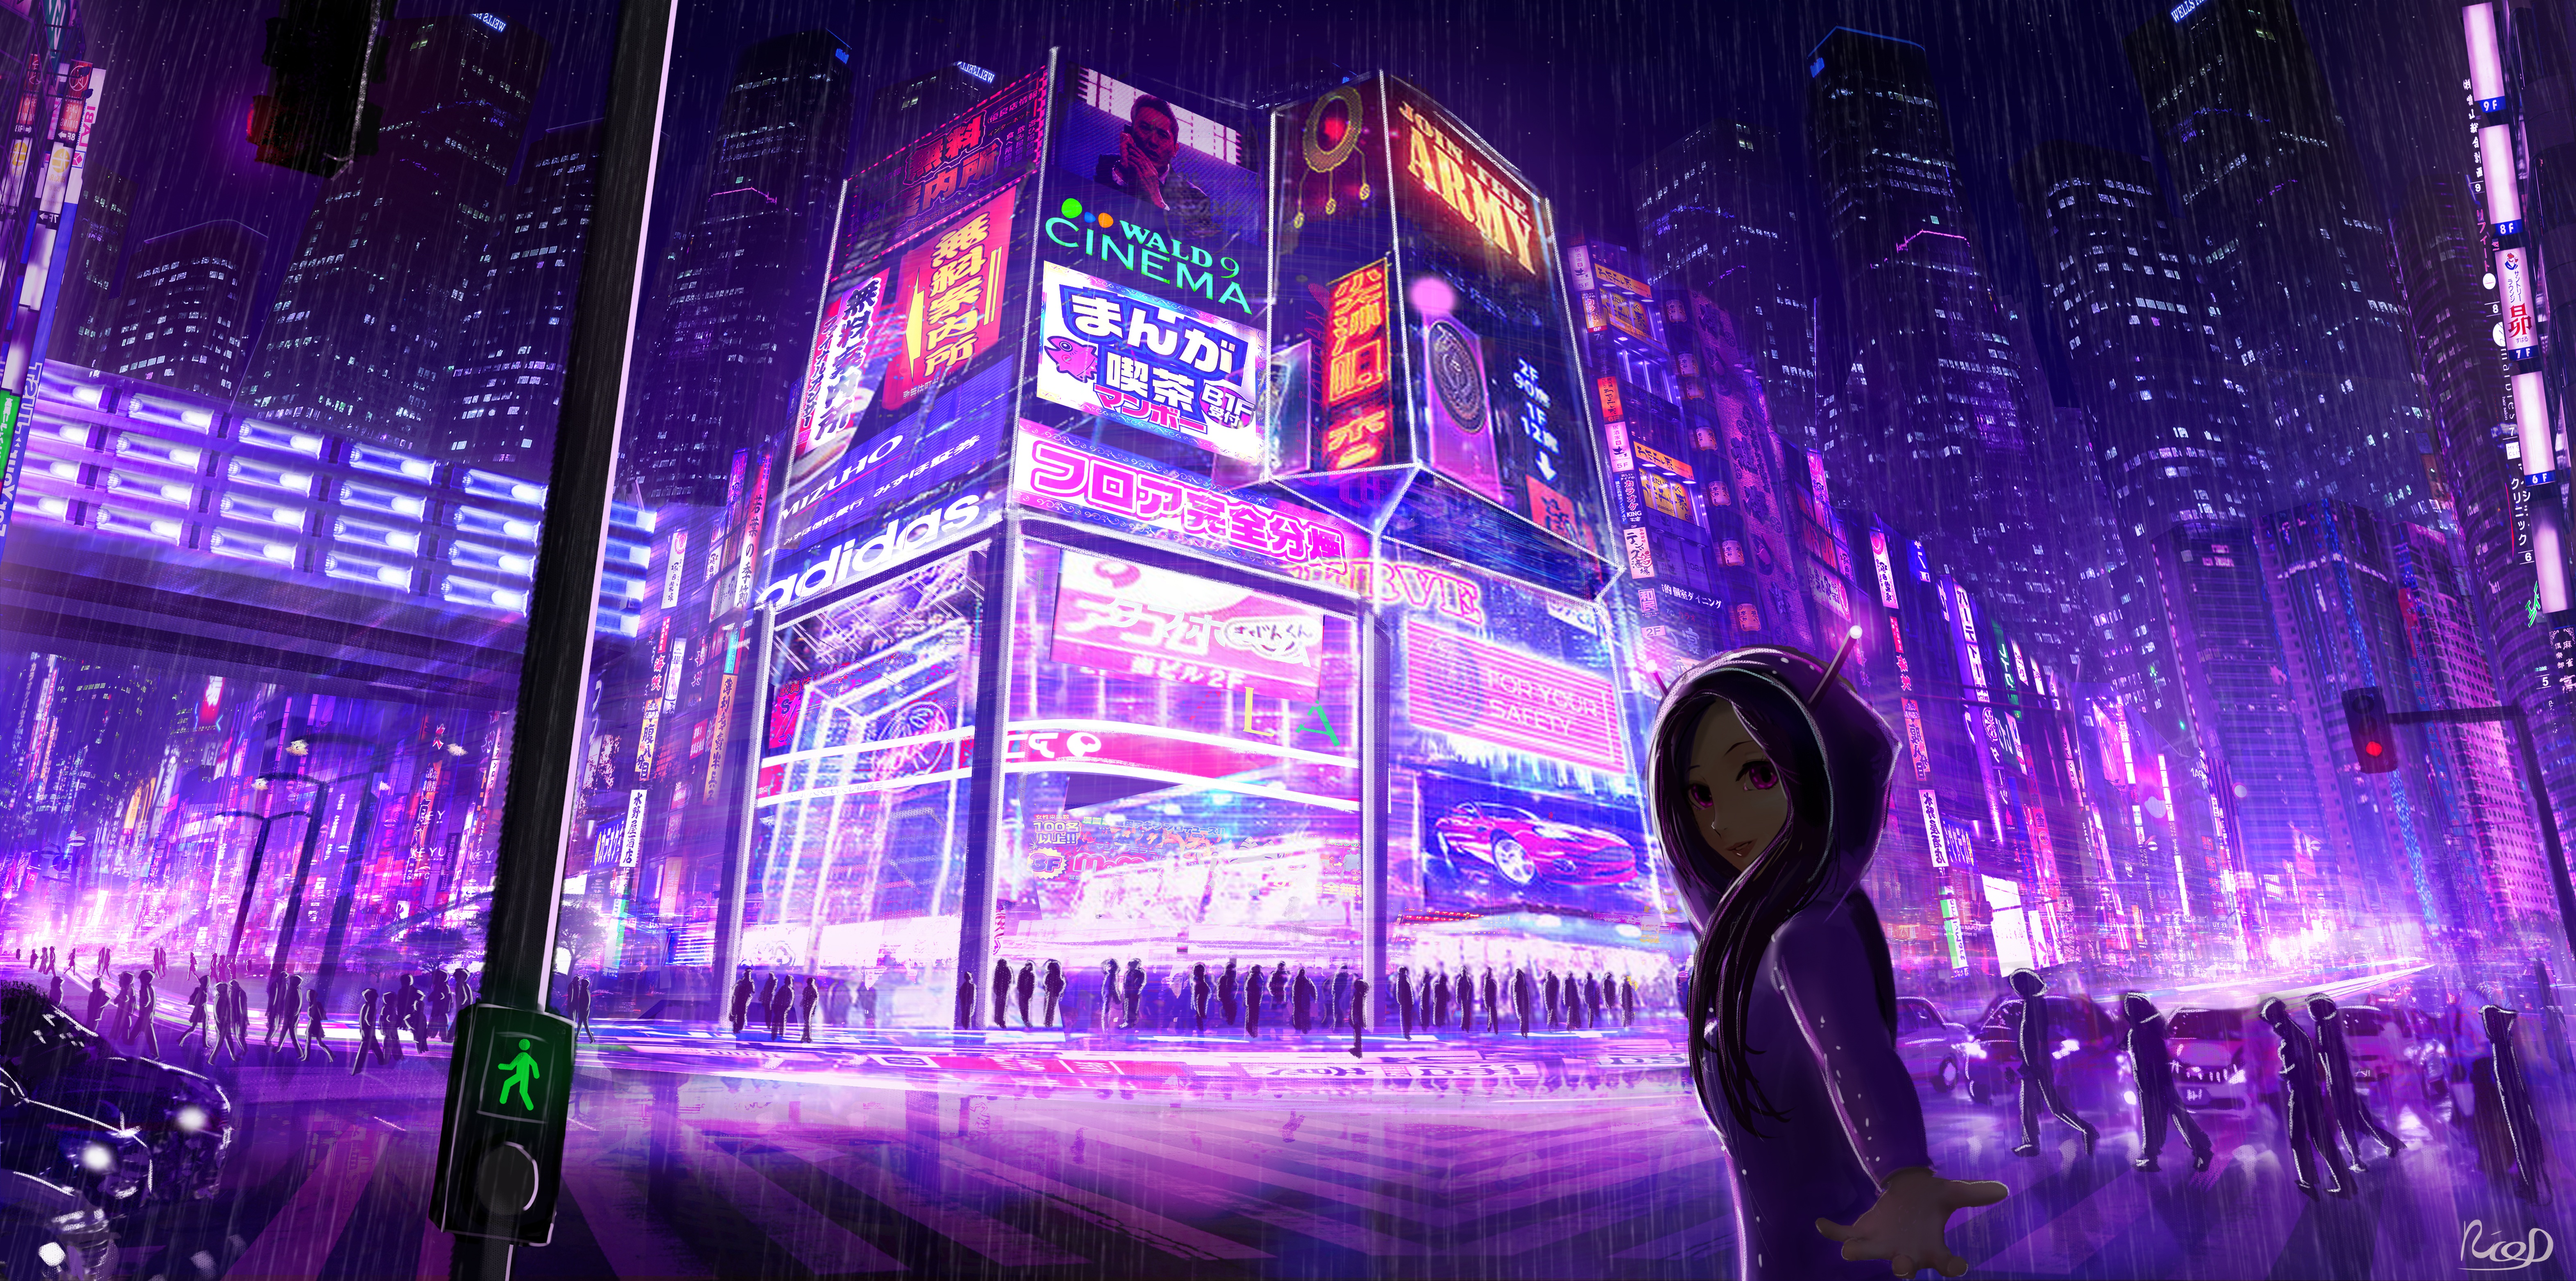 Anime Girl City Night Wallpapers - Wallpaper Cave